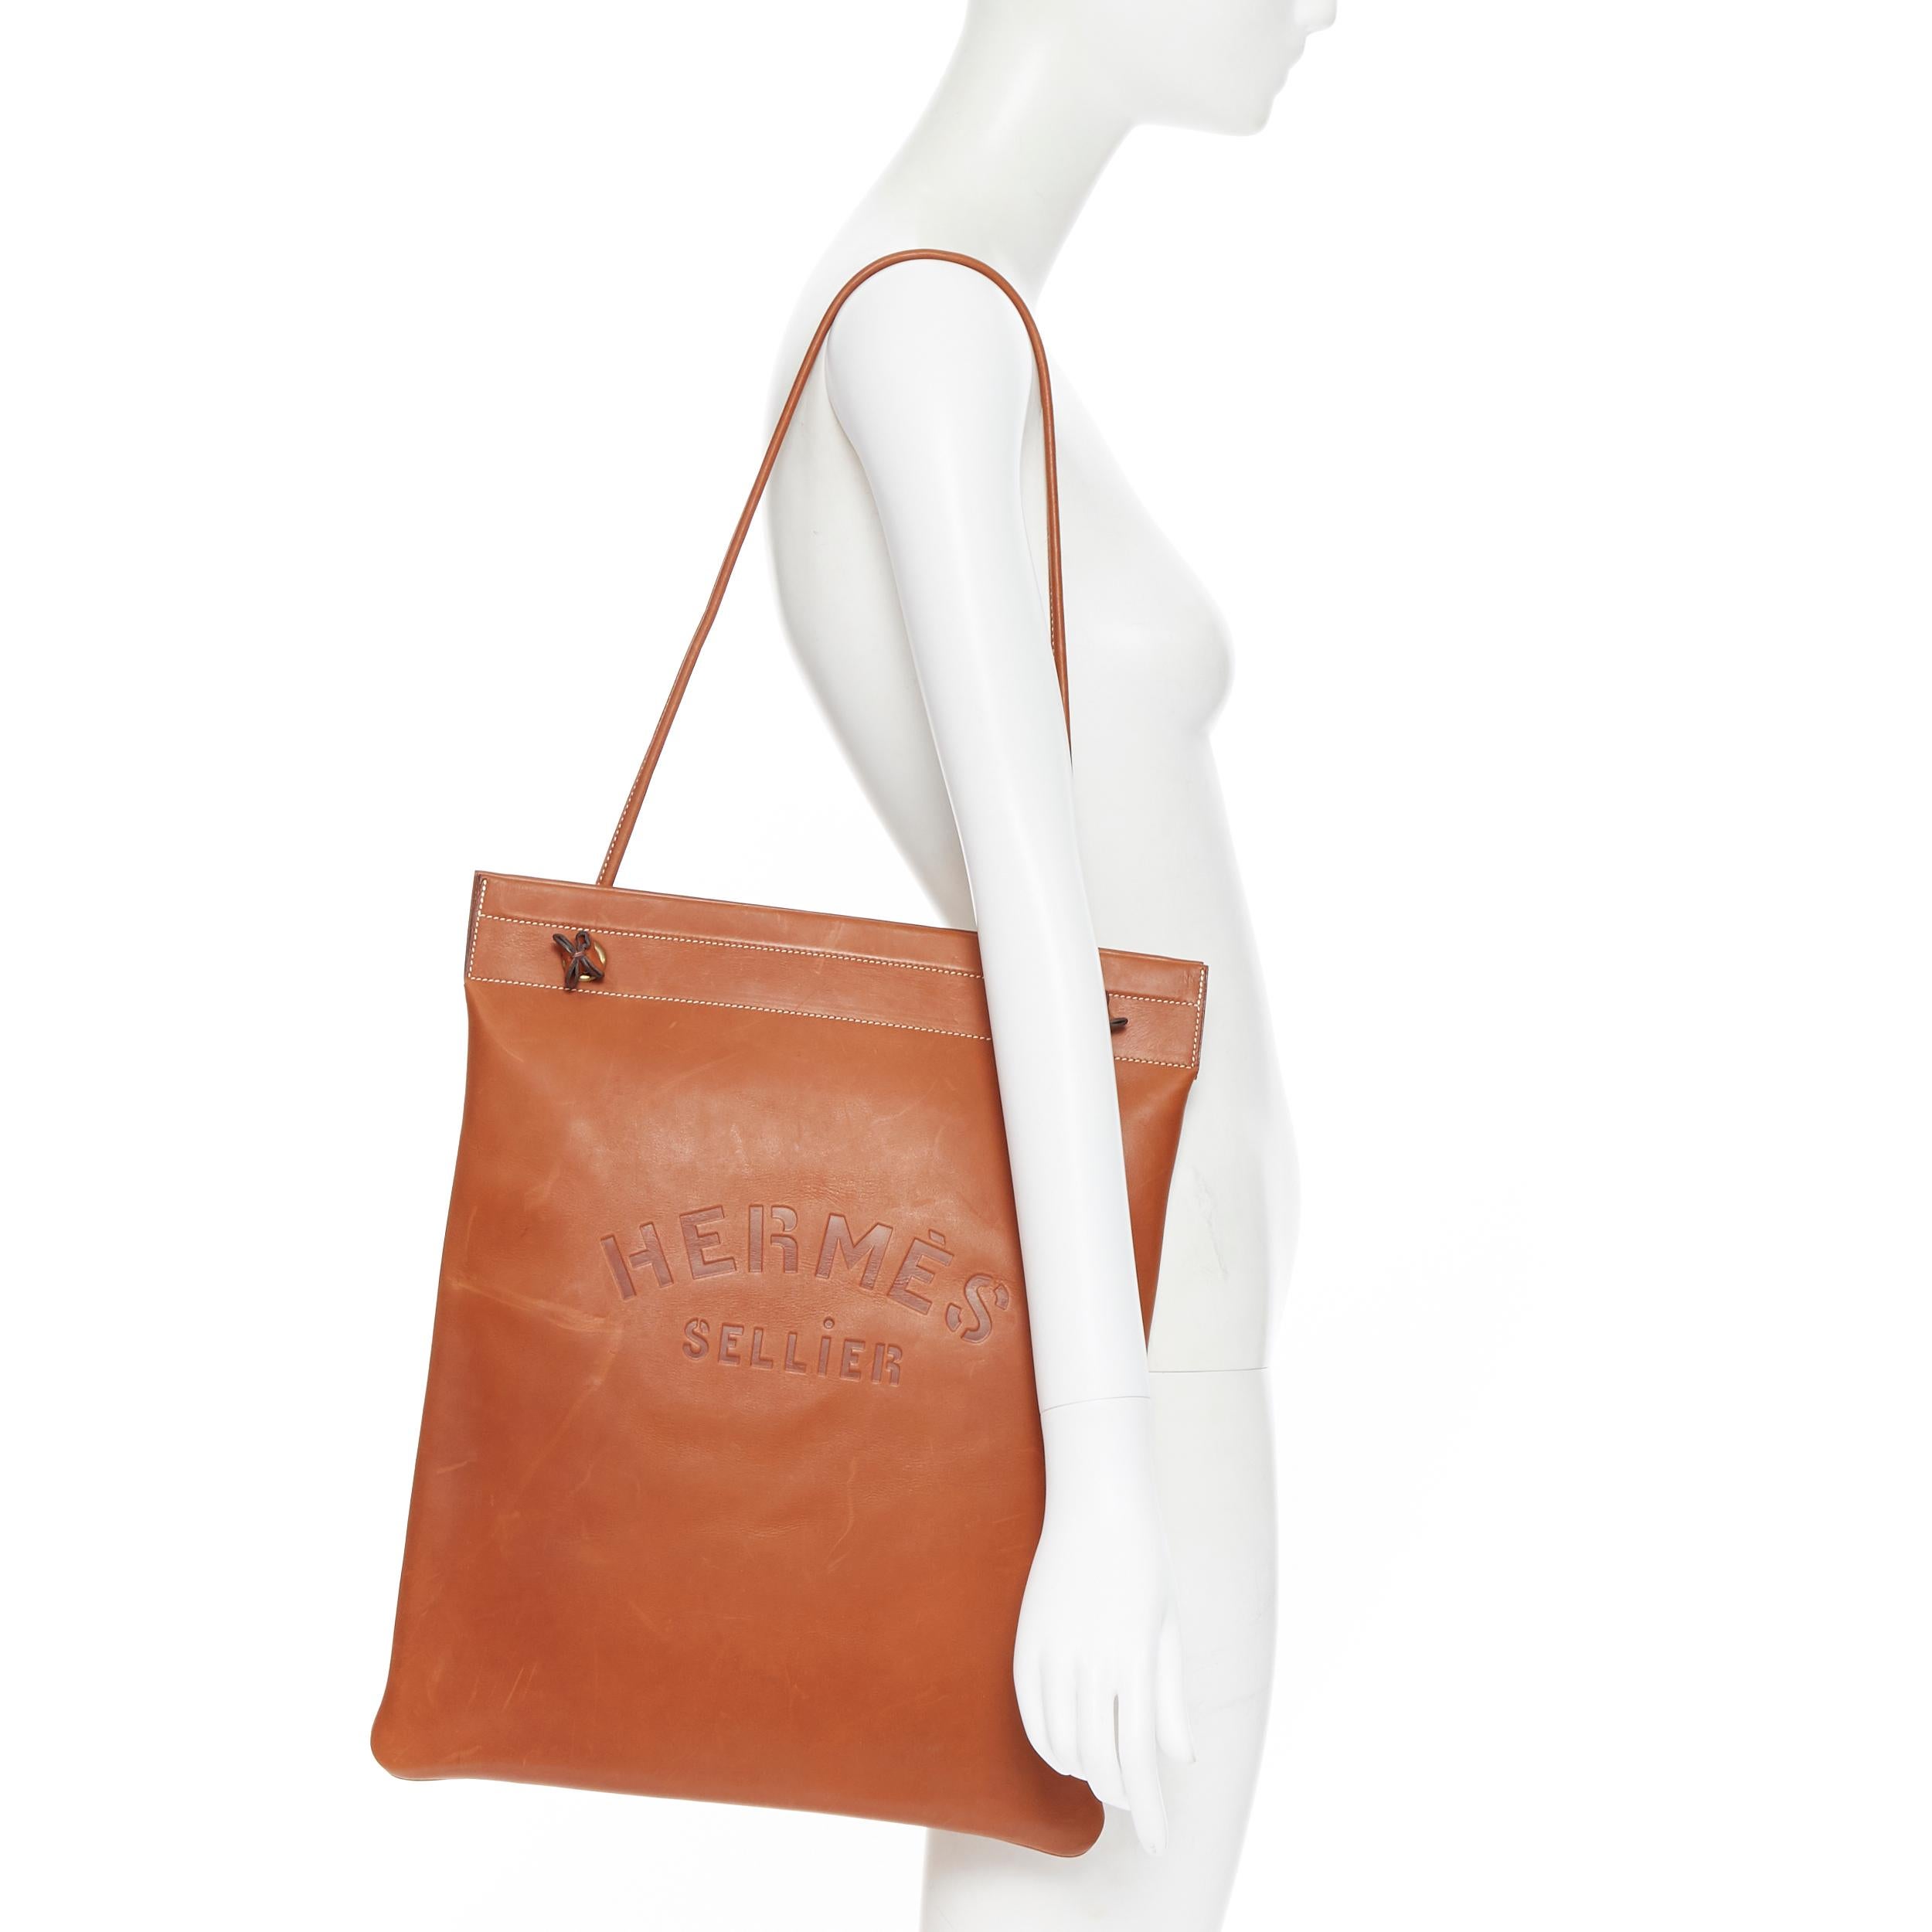 rare HERMES Aline GM Large Seller logo deboss tan leather sboulder tote bag
Brand: Hermes
Model Name / Style: Aline GM
Material: Leather
Color: Brown
Pattern: Solid
Extra Detail: Tan leather. Logo debossed at front. White overstitching at top. Cord